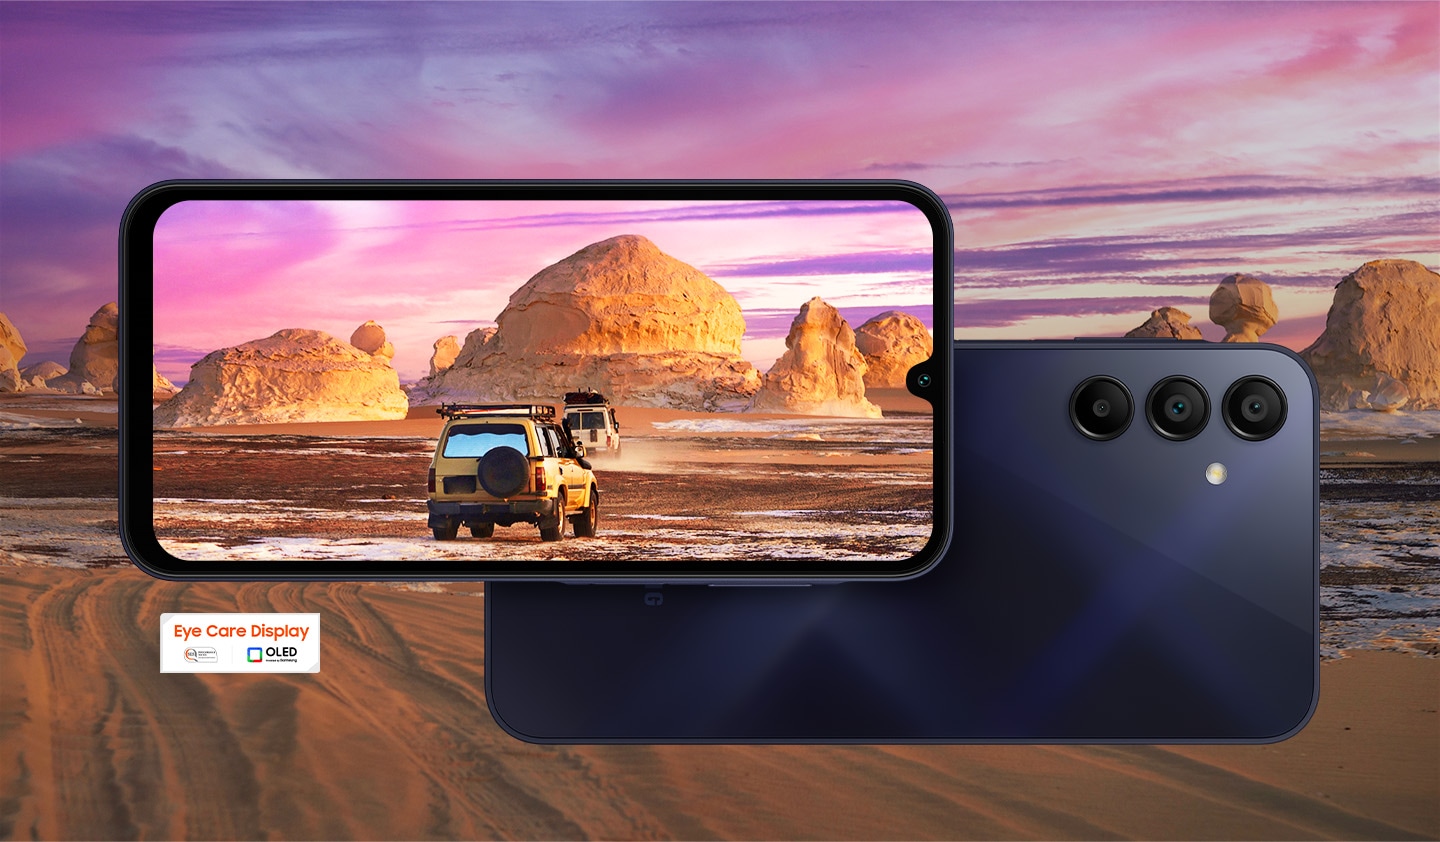 In the background, a beautiful landscape of the desert is shown. In the foreground, two Galaxy A15 devices, with the left showing the screen and the right showing the backside, are shown. The landscape overlaps onto the screen of the leftside device and shows two trucks driving into the desert. In the lower left, the Eye Care Display logo is shown.